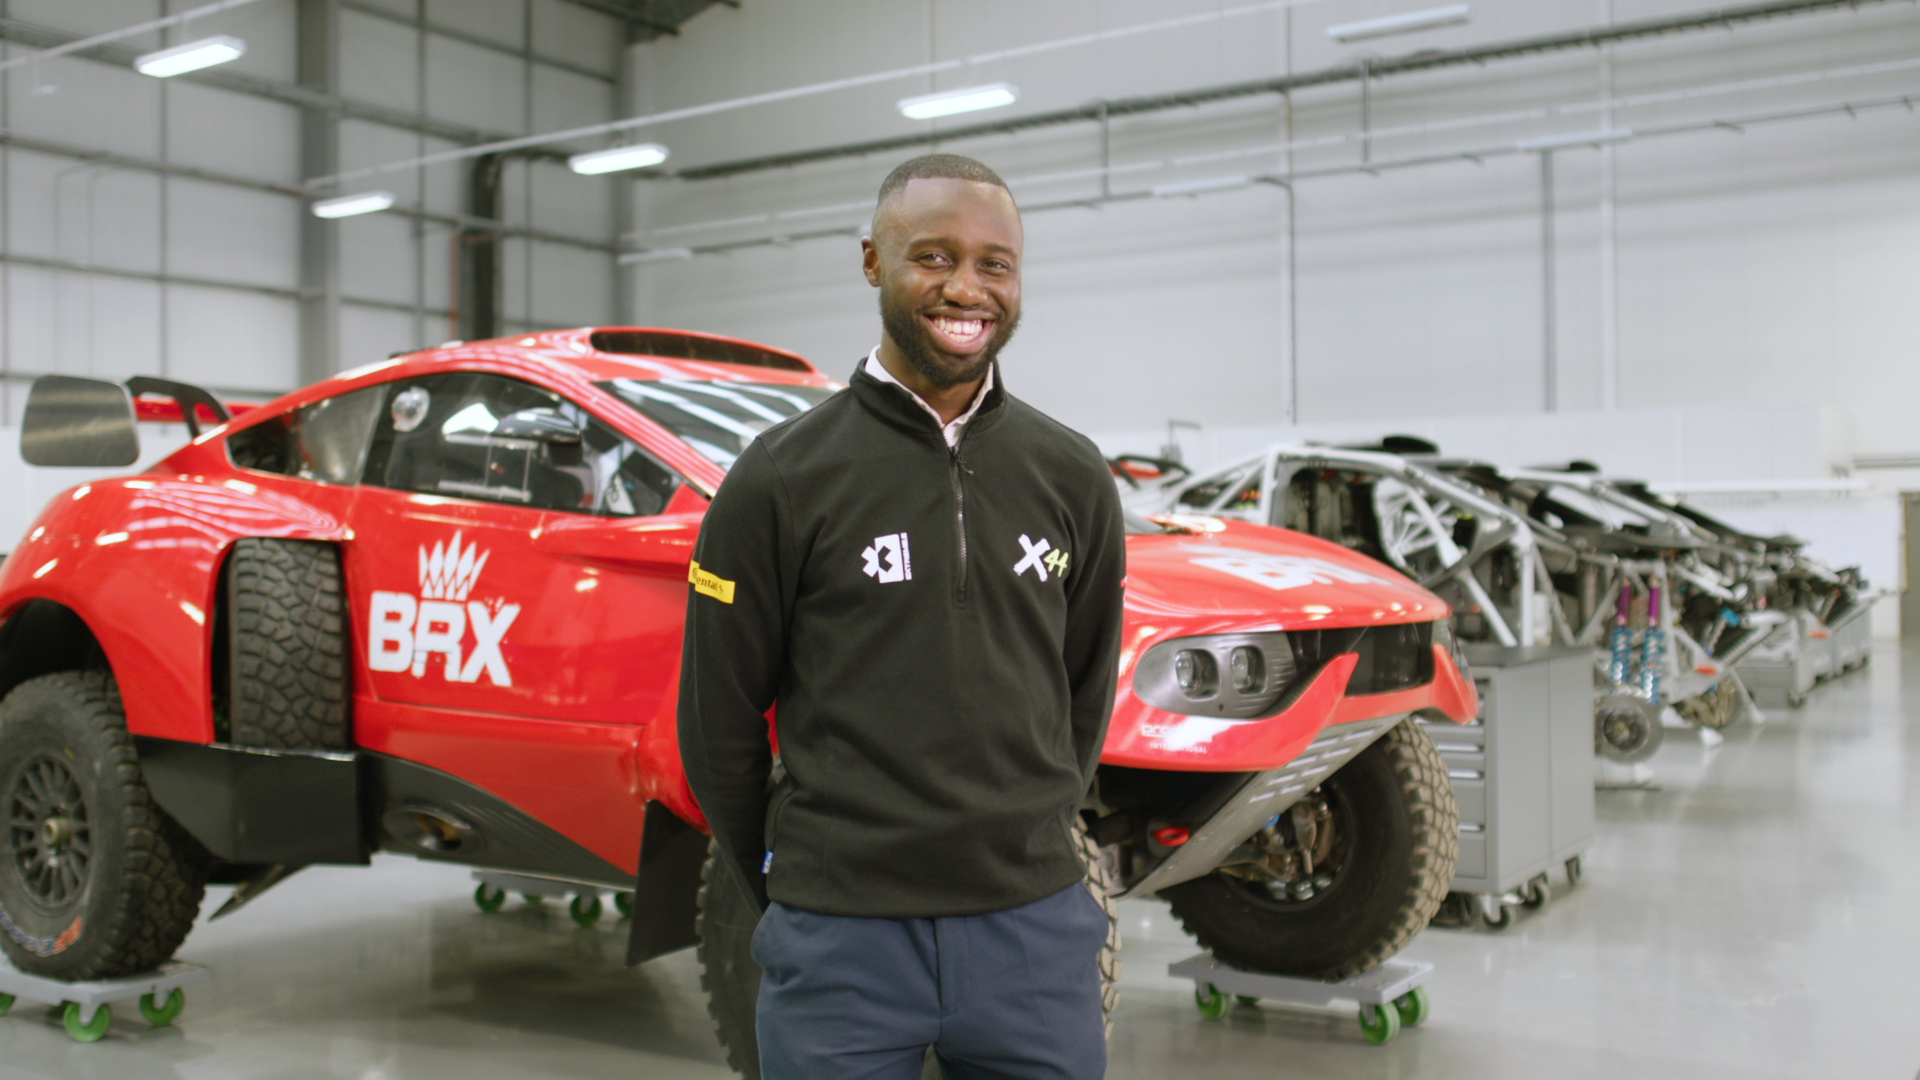 George Imafidon in front of a racing car